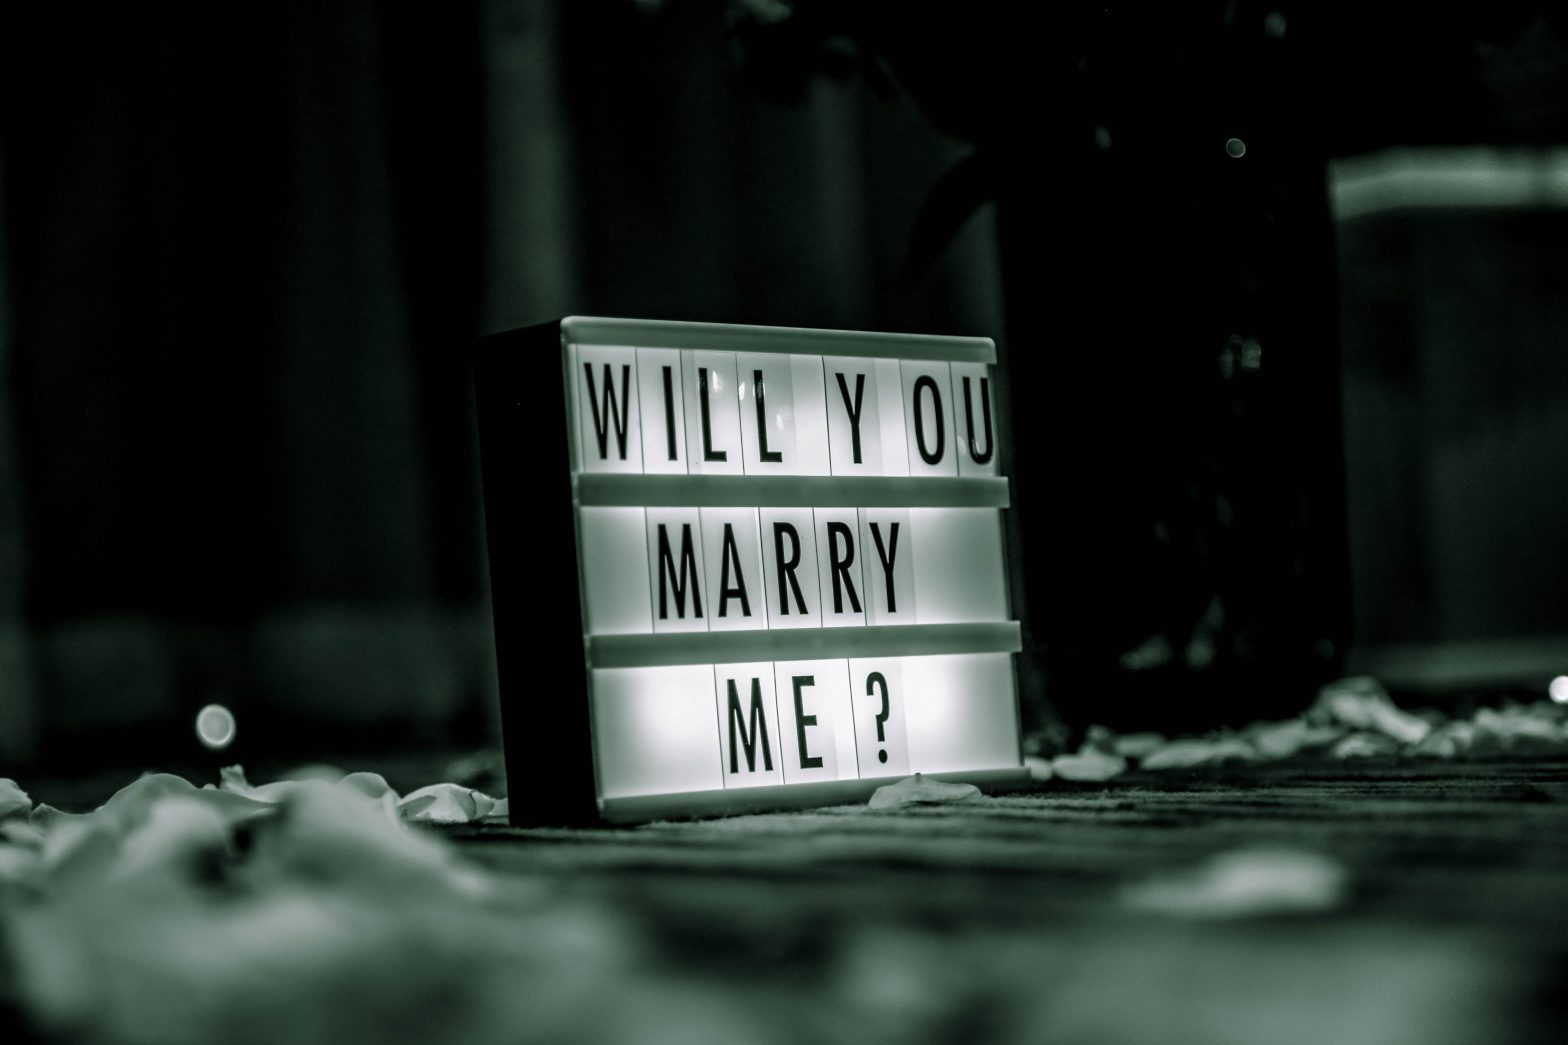 Will You Marry Me?